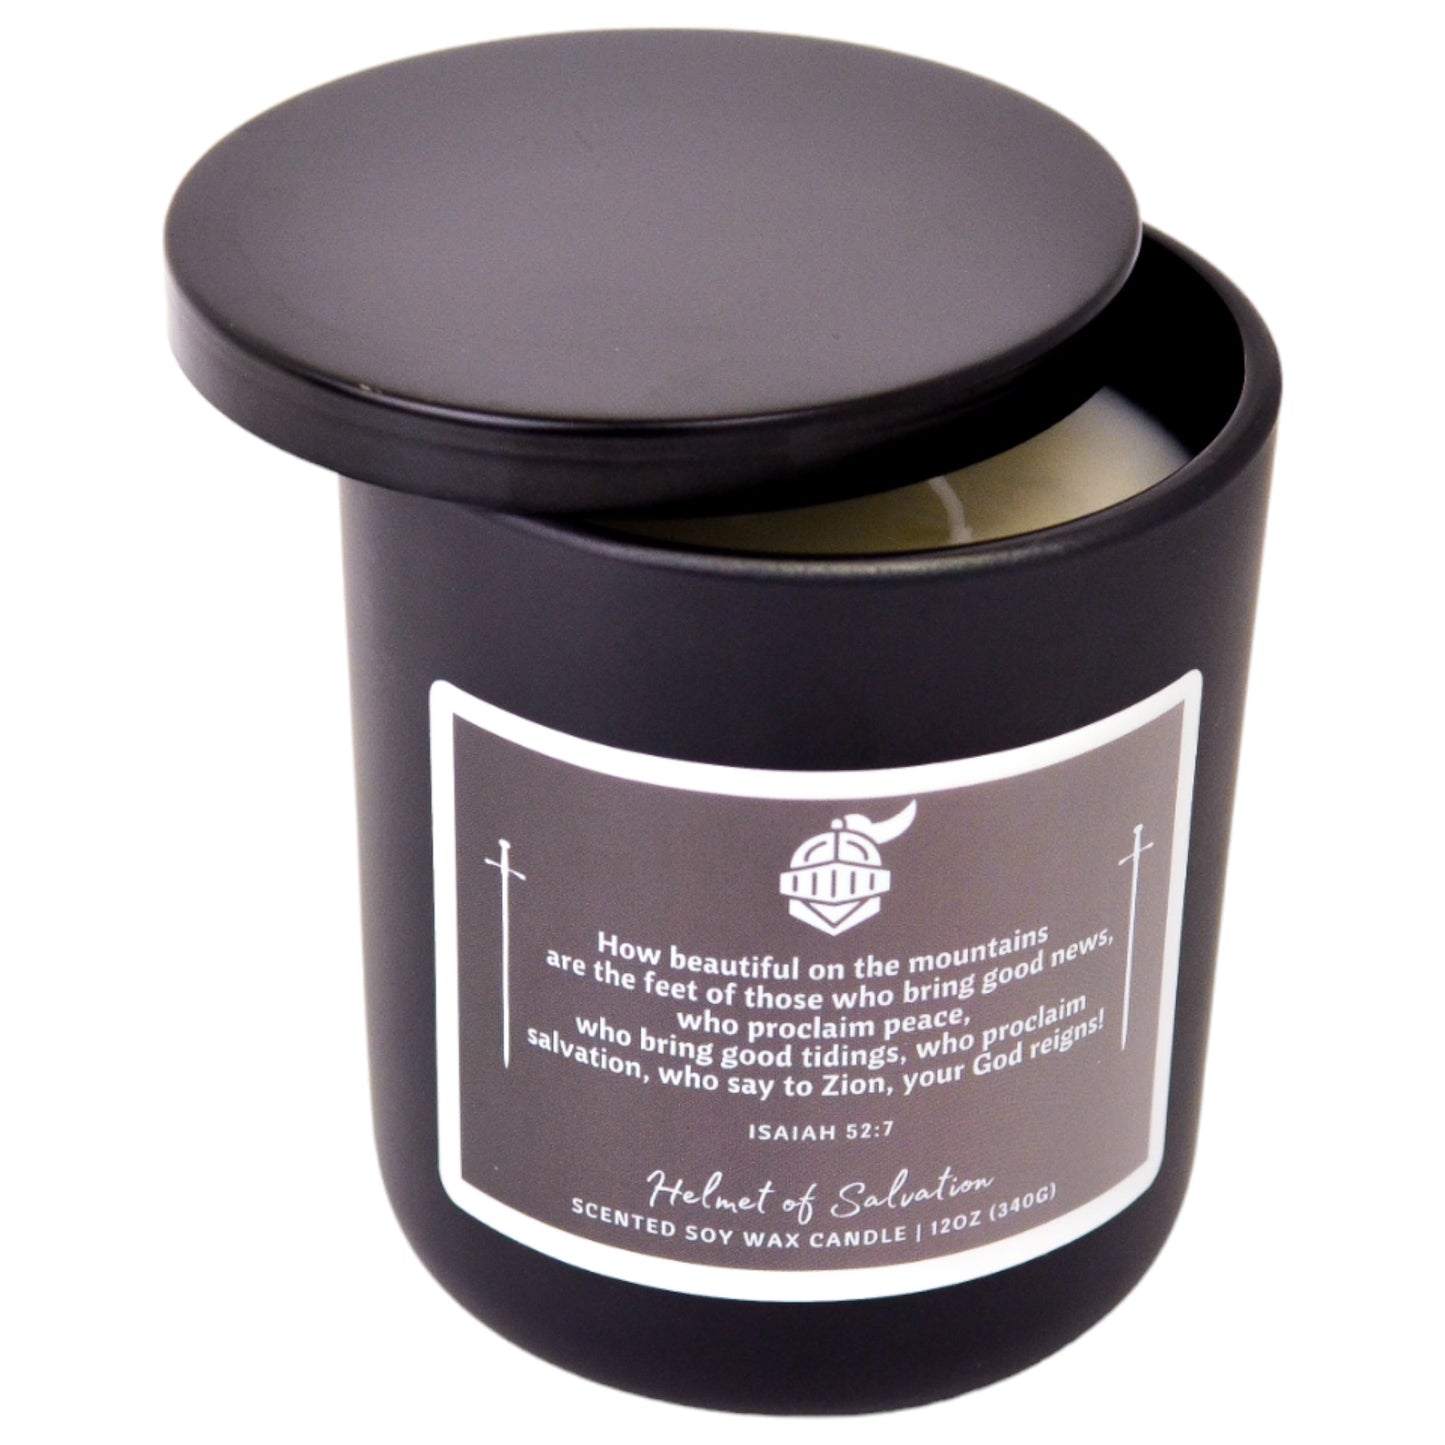 Helmet of Salvation Scented Soy Wax Christian Candle 12oz